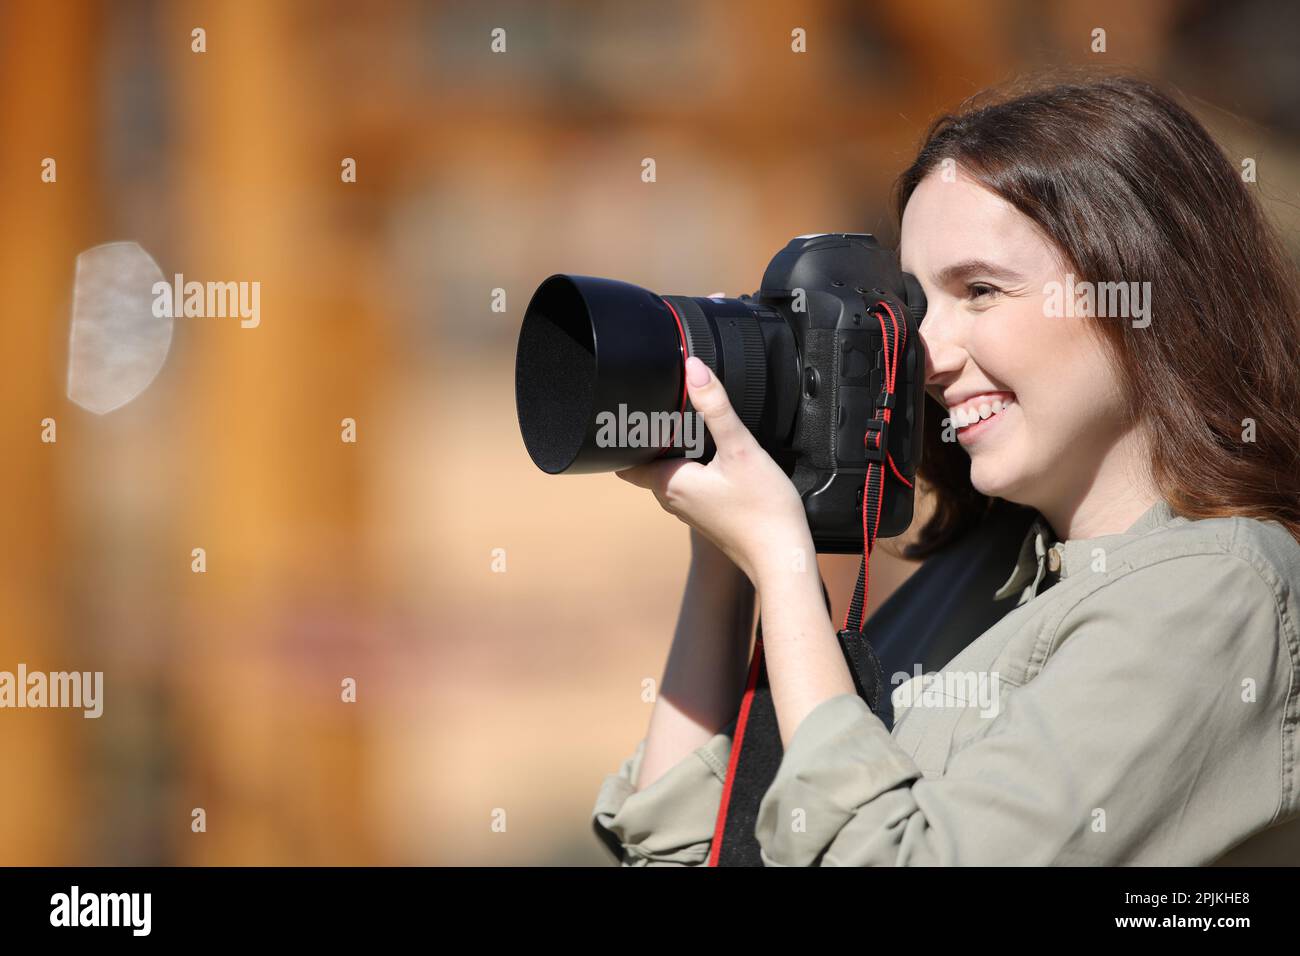 Side view portrait of a happy photographer taking photos outdoor Stock Photo